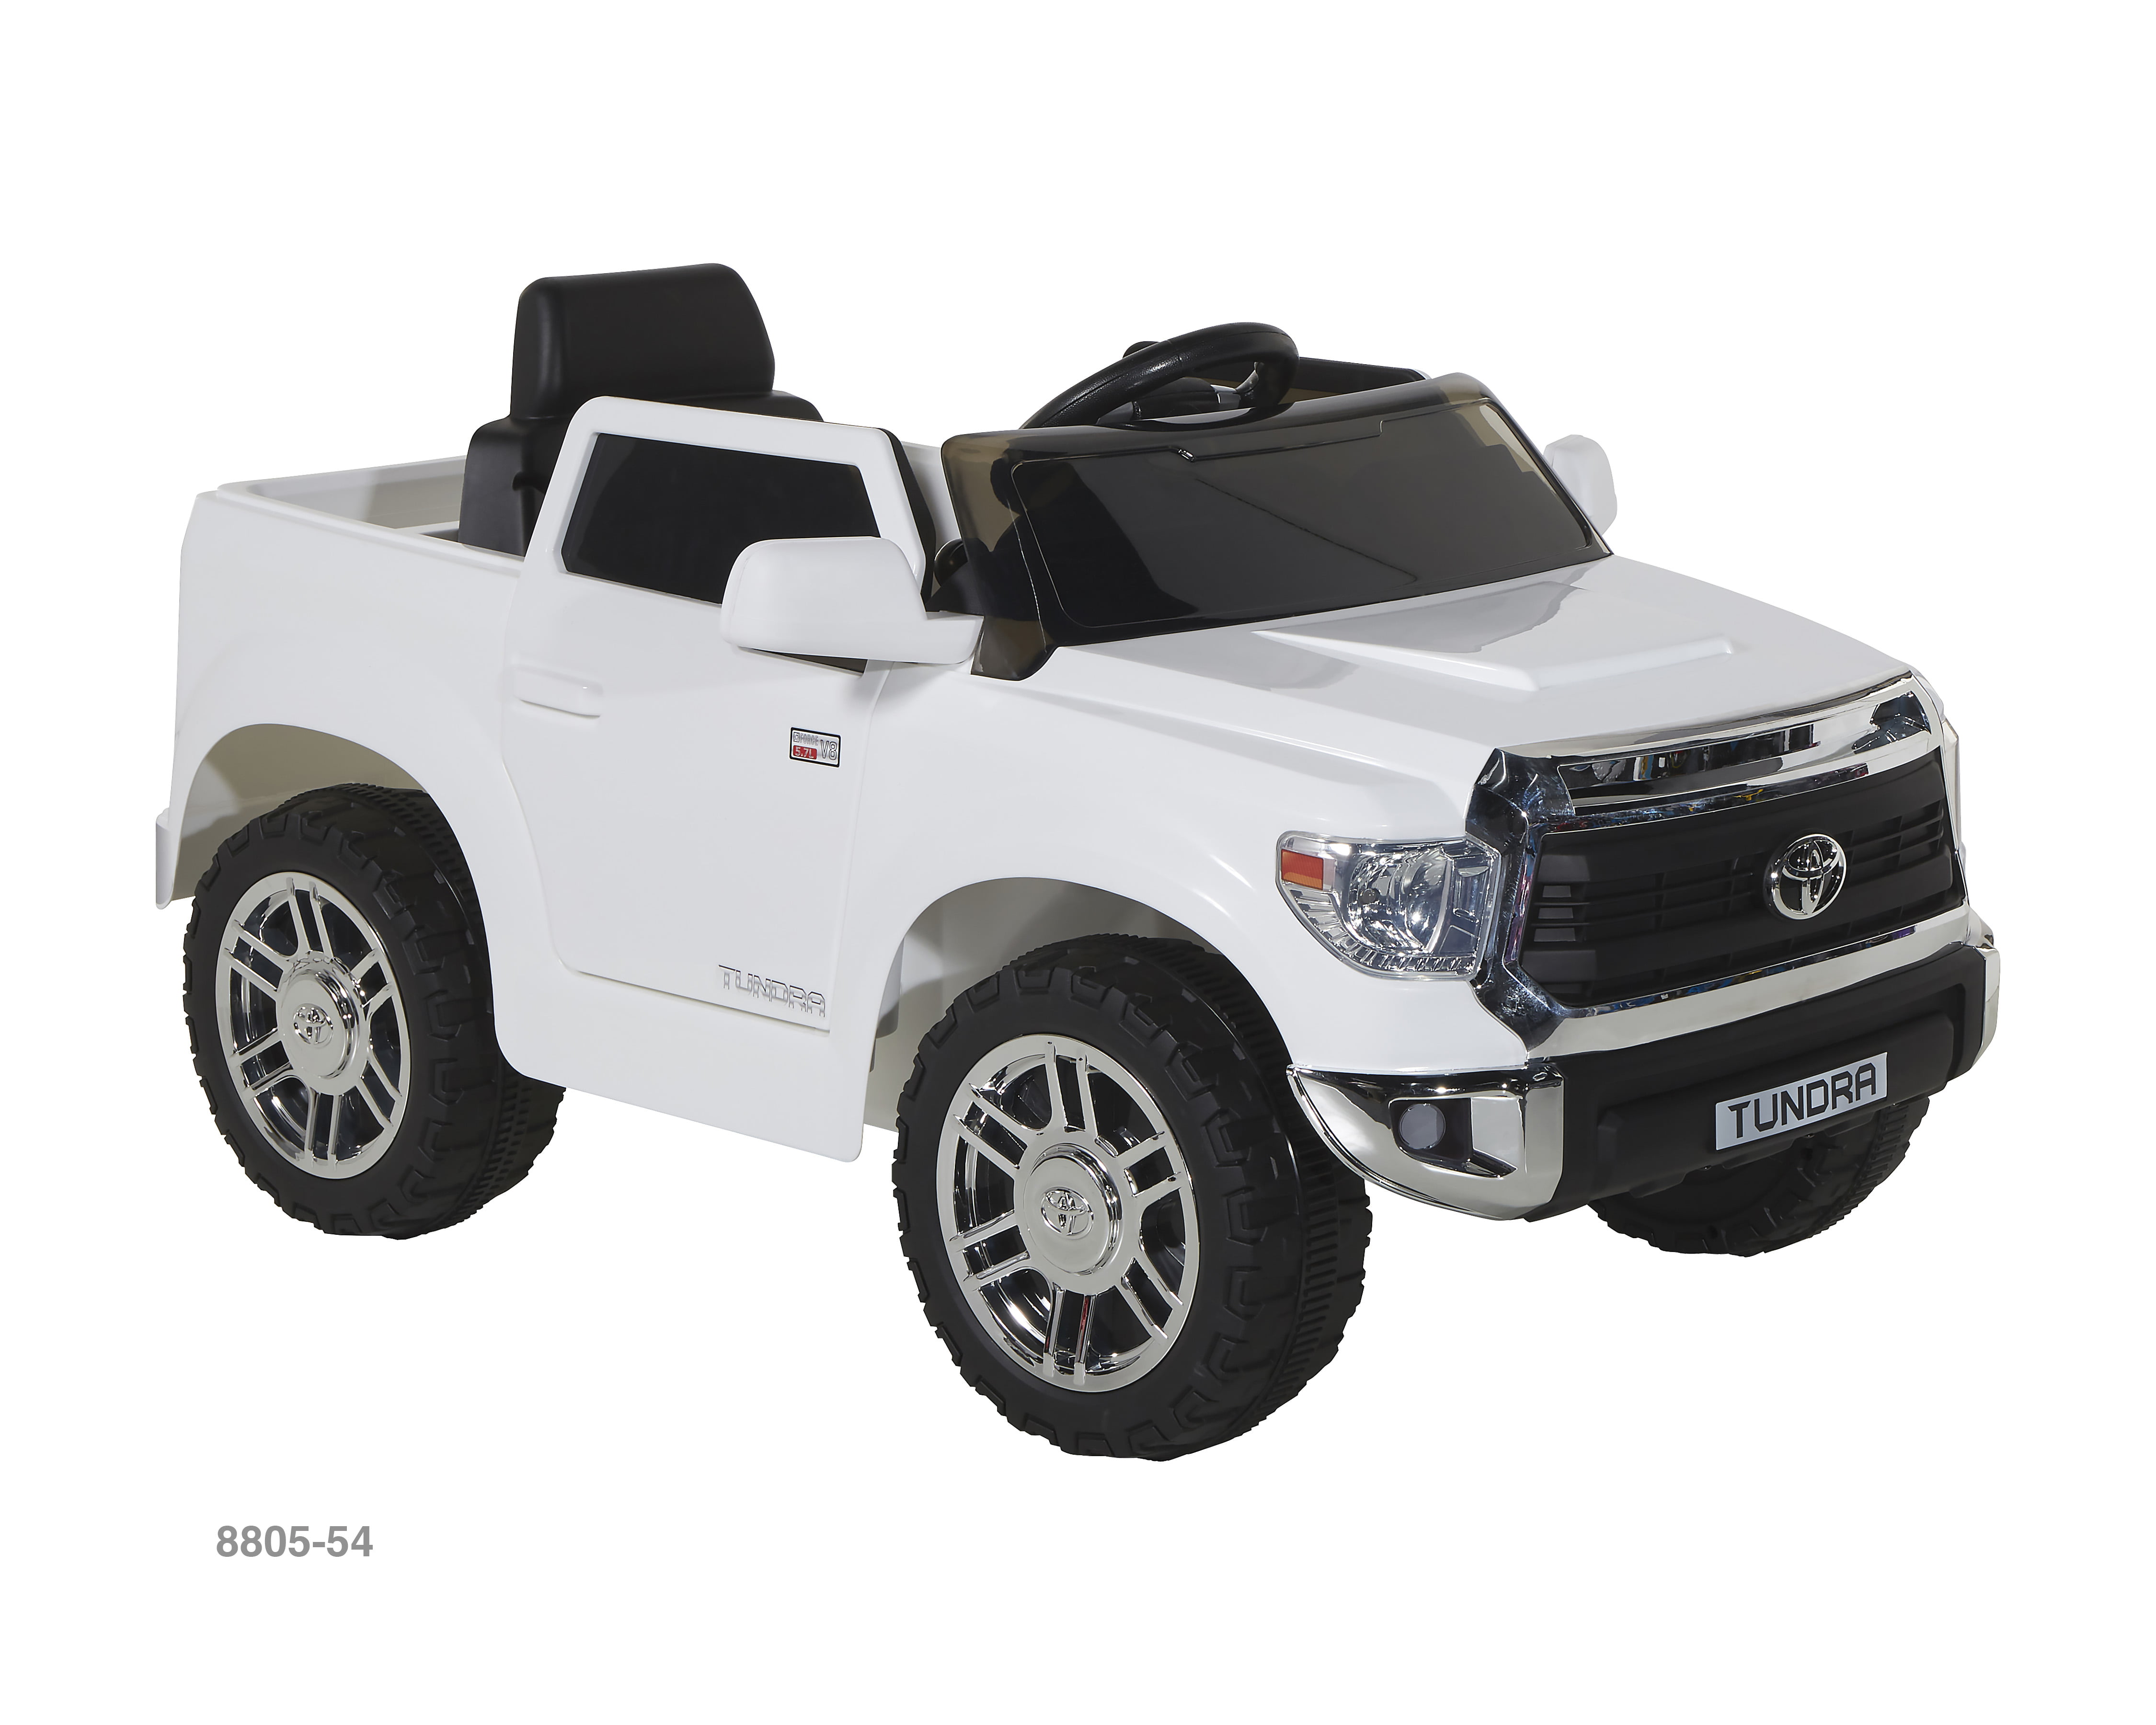 6 Volt Toyota Tundra Electric Ride On by Dynacraft with working Truck